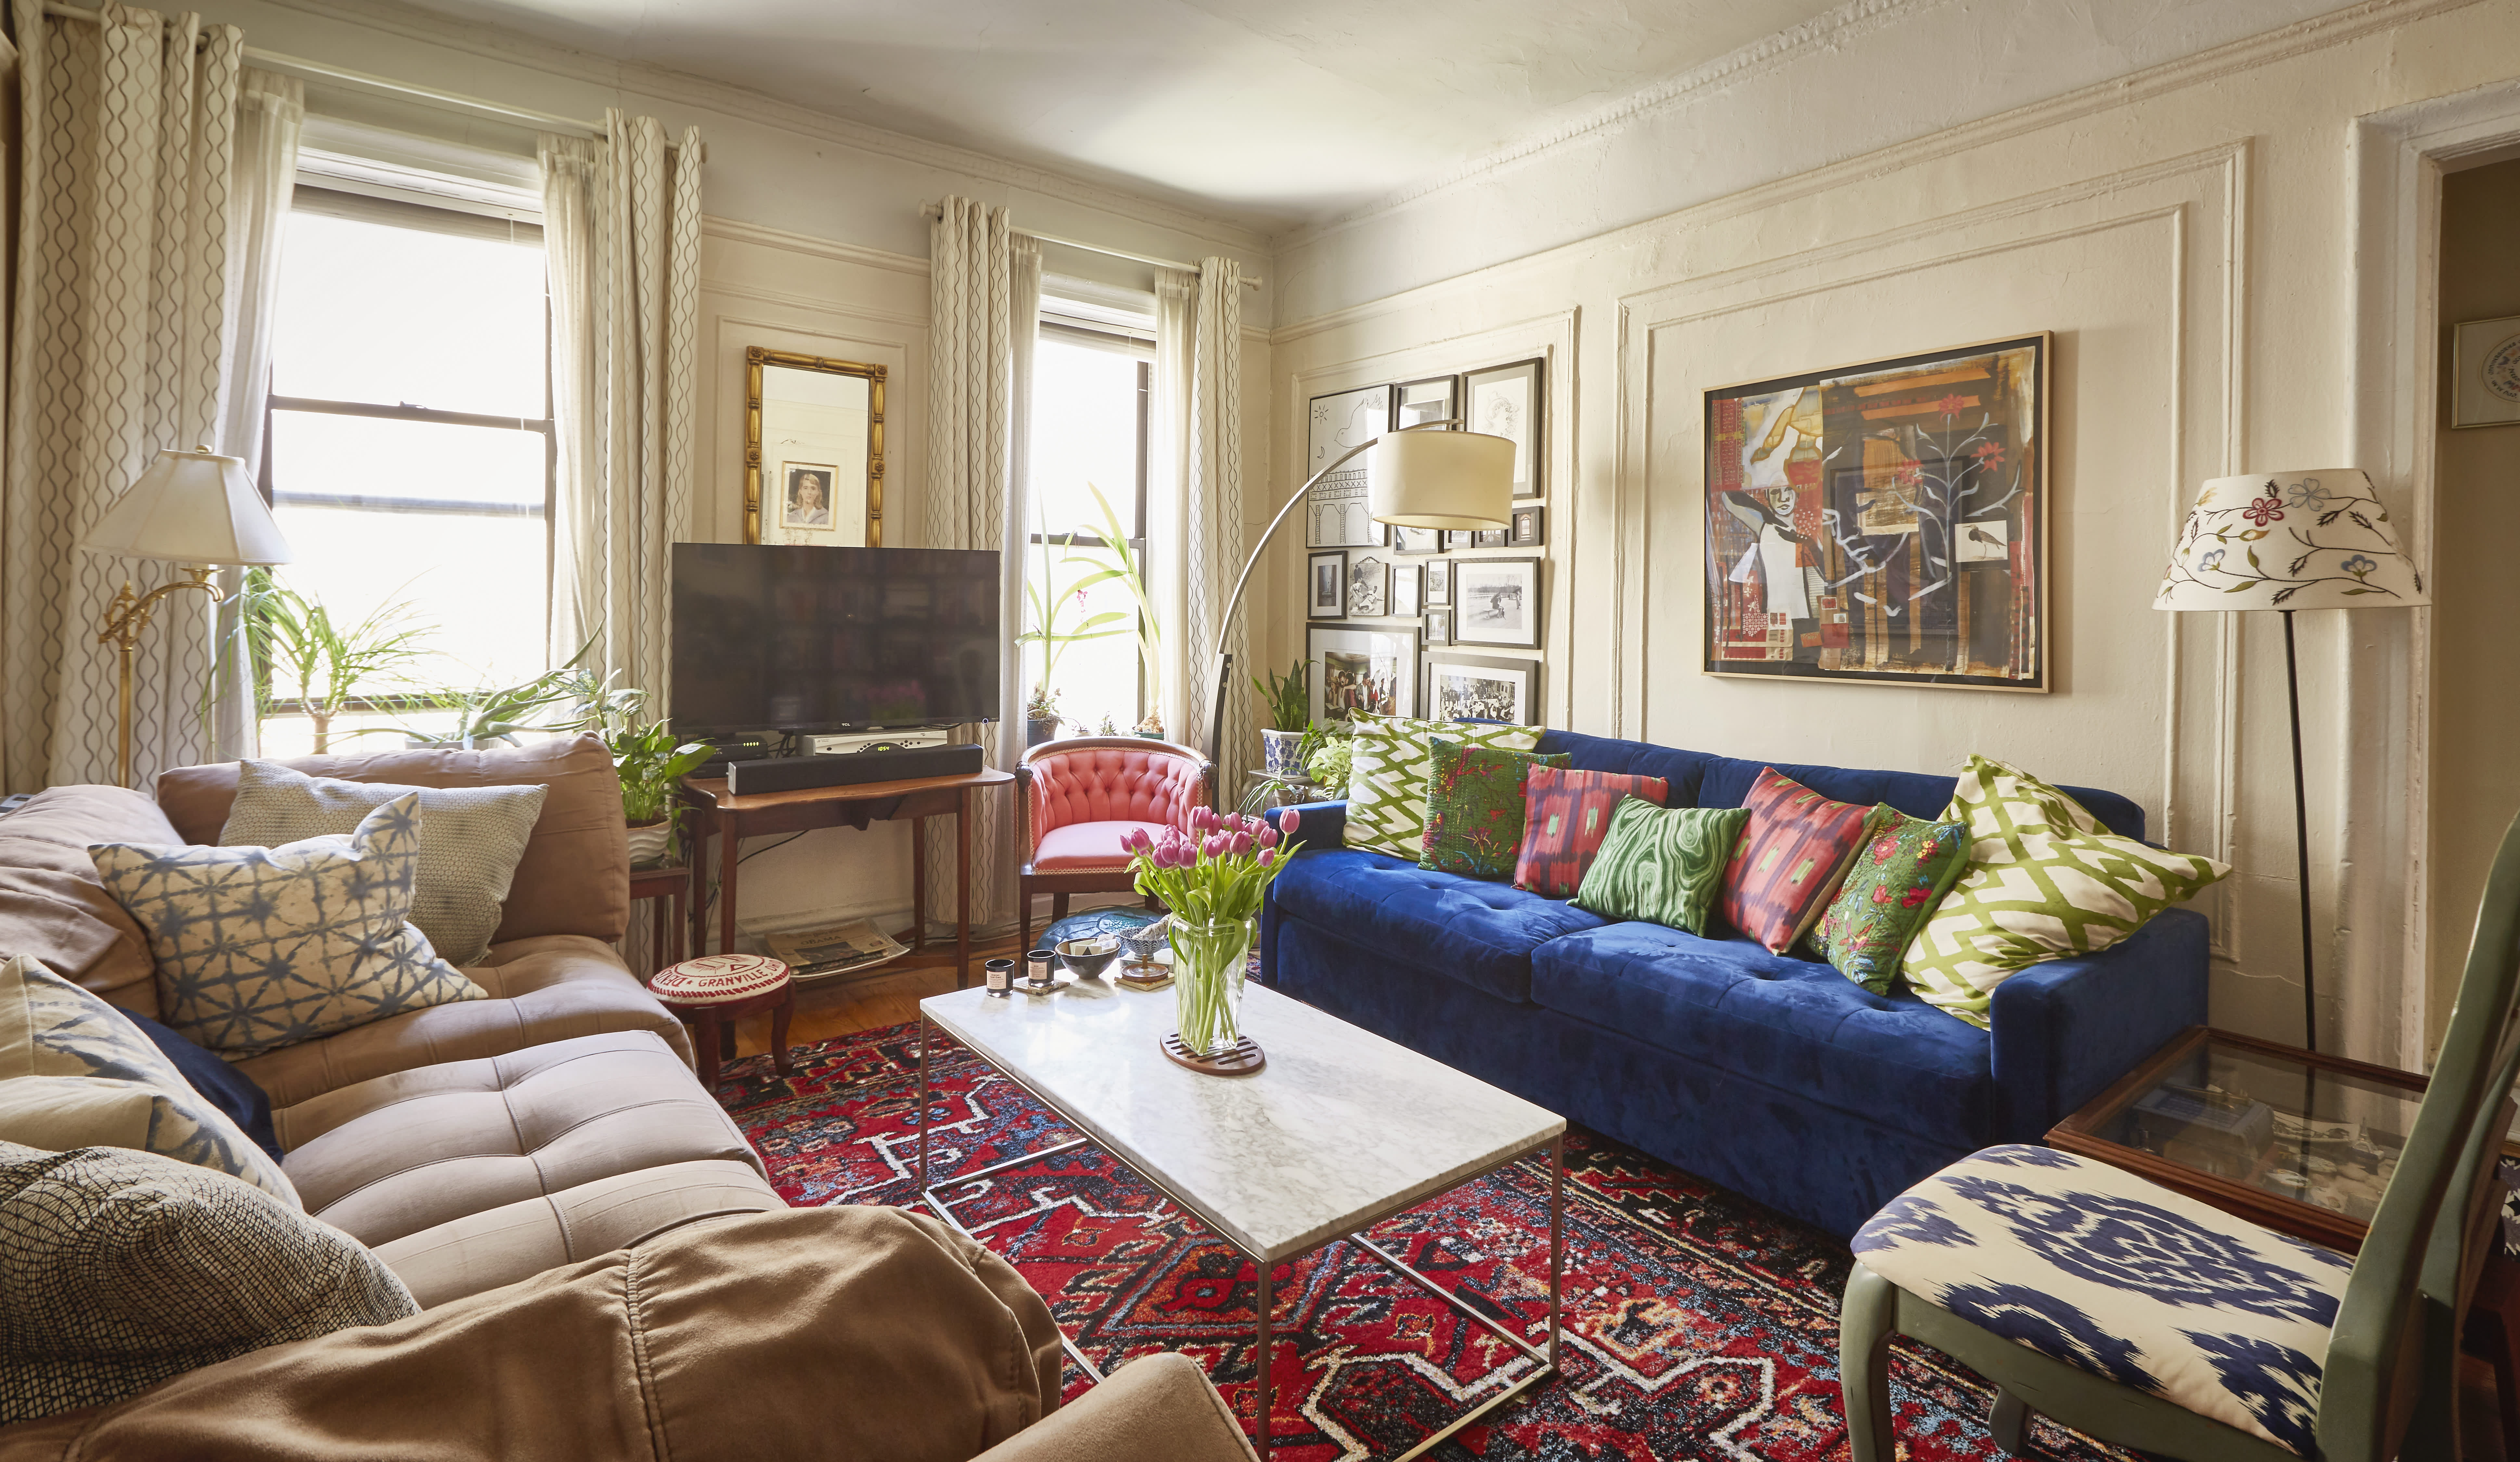 Famous folk at home: Tory Burch in her Manhattan apartment